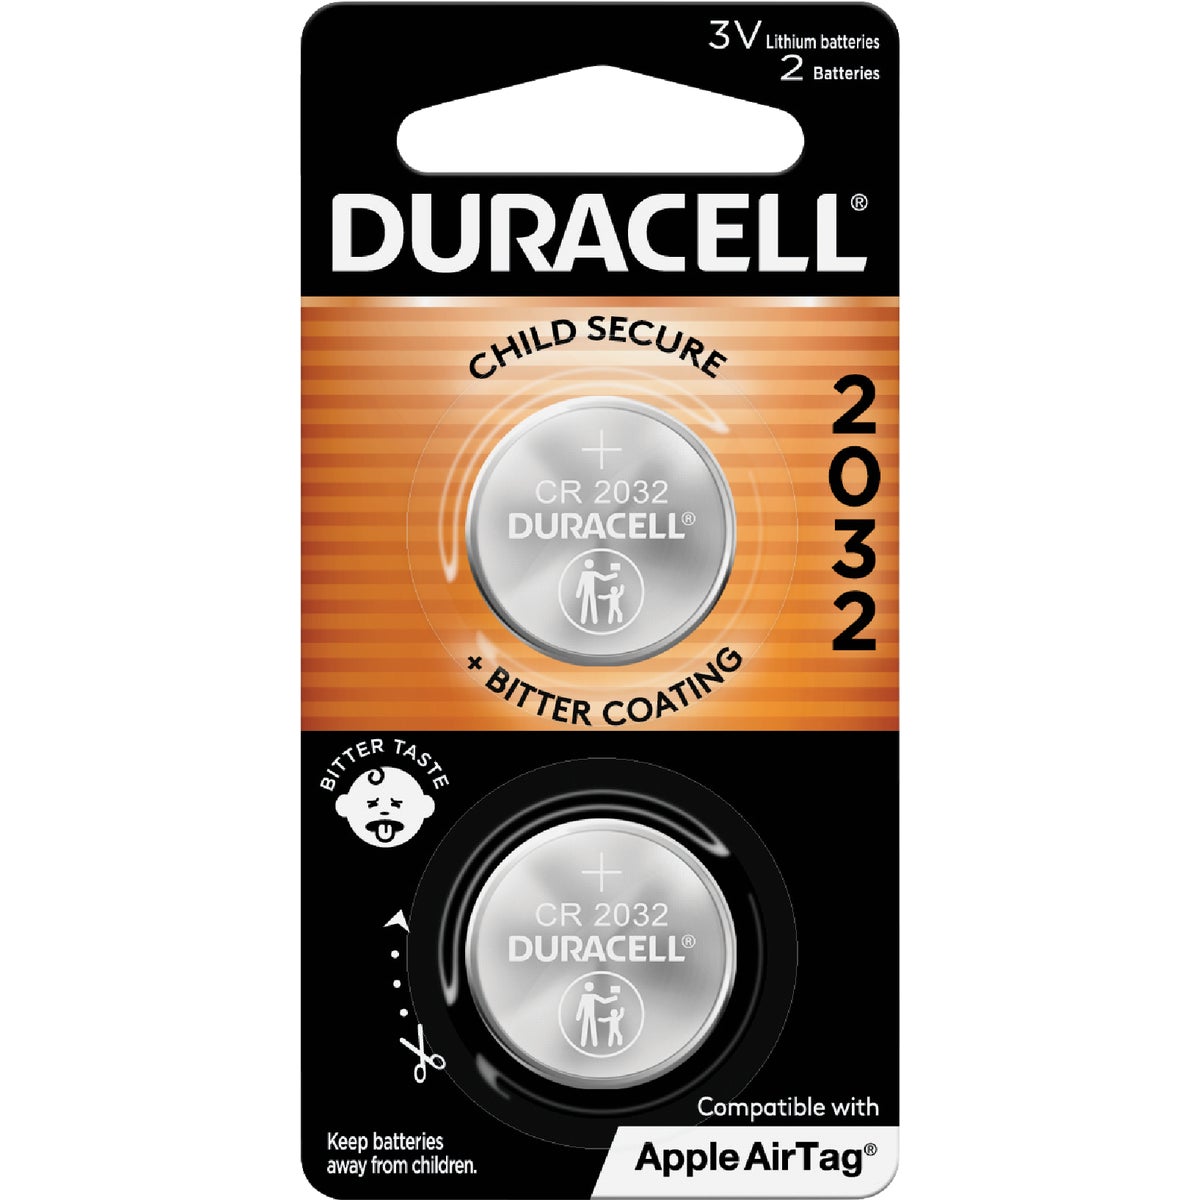 Duracell 2032 Lithium Coin Cell Battery (2-Pack)